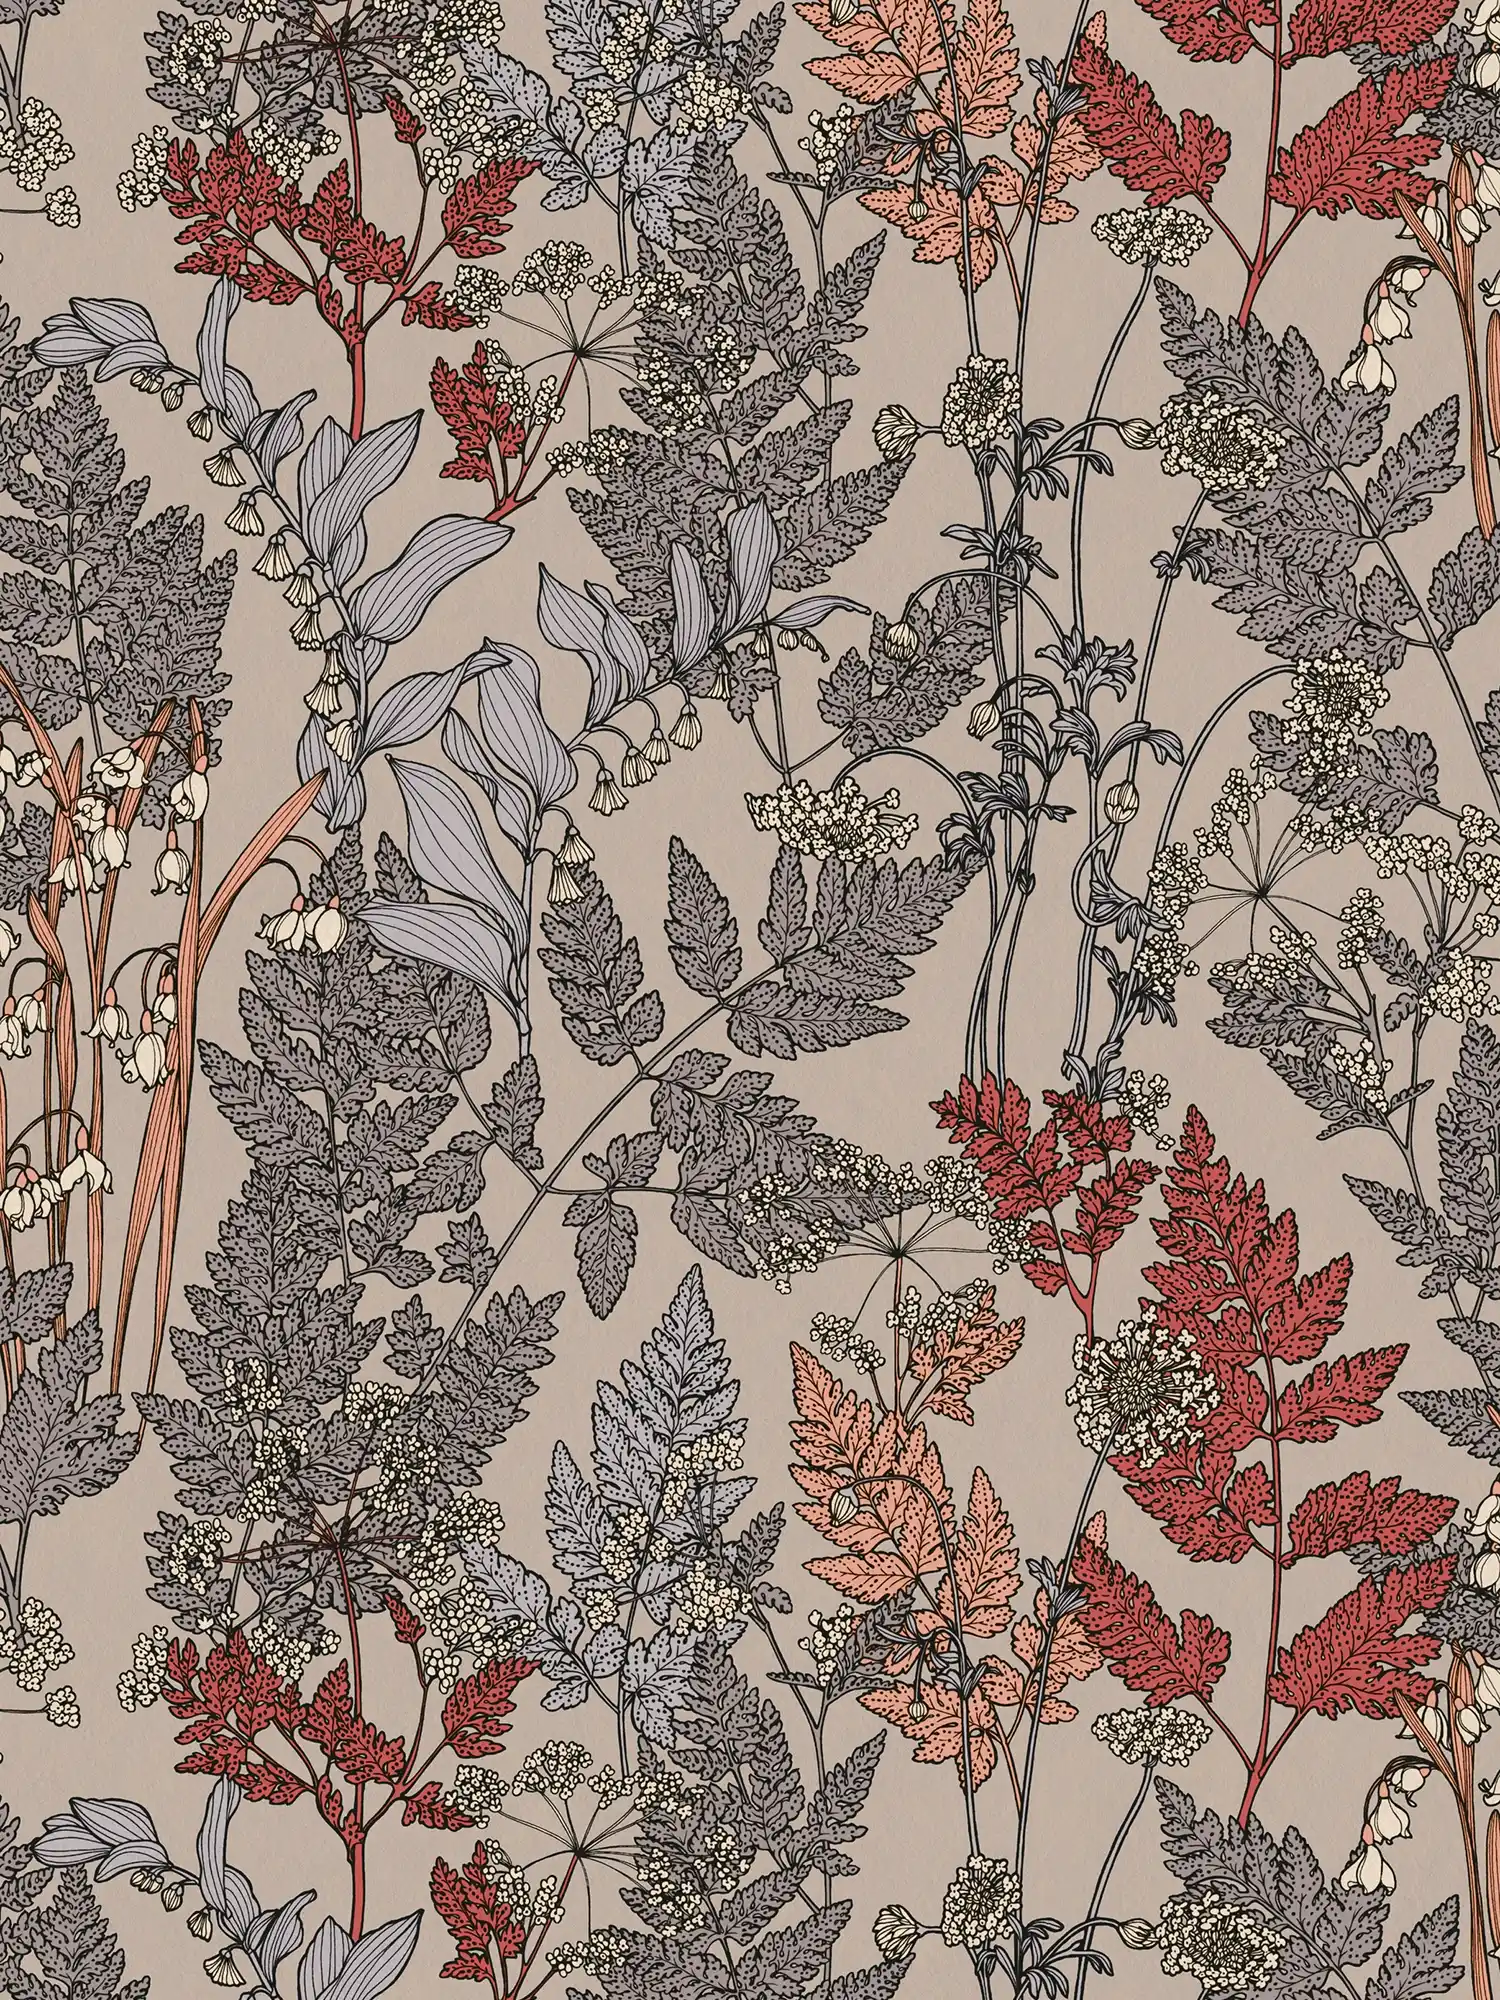 Beige floral wallpaper with leaves & flowers drawing - beige, grey, red
